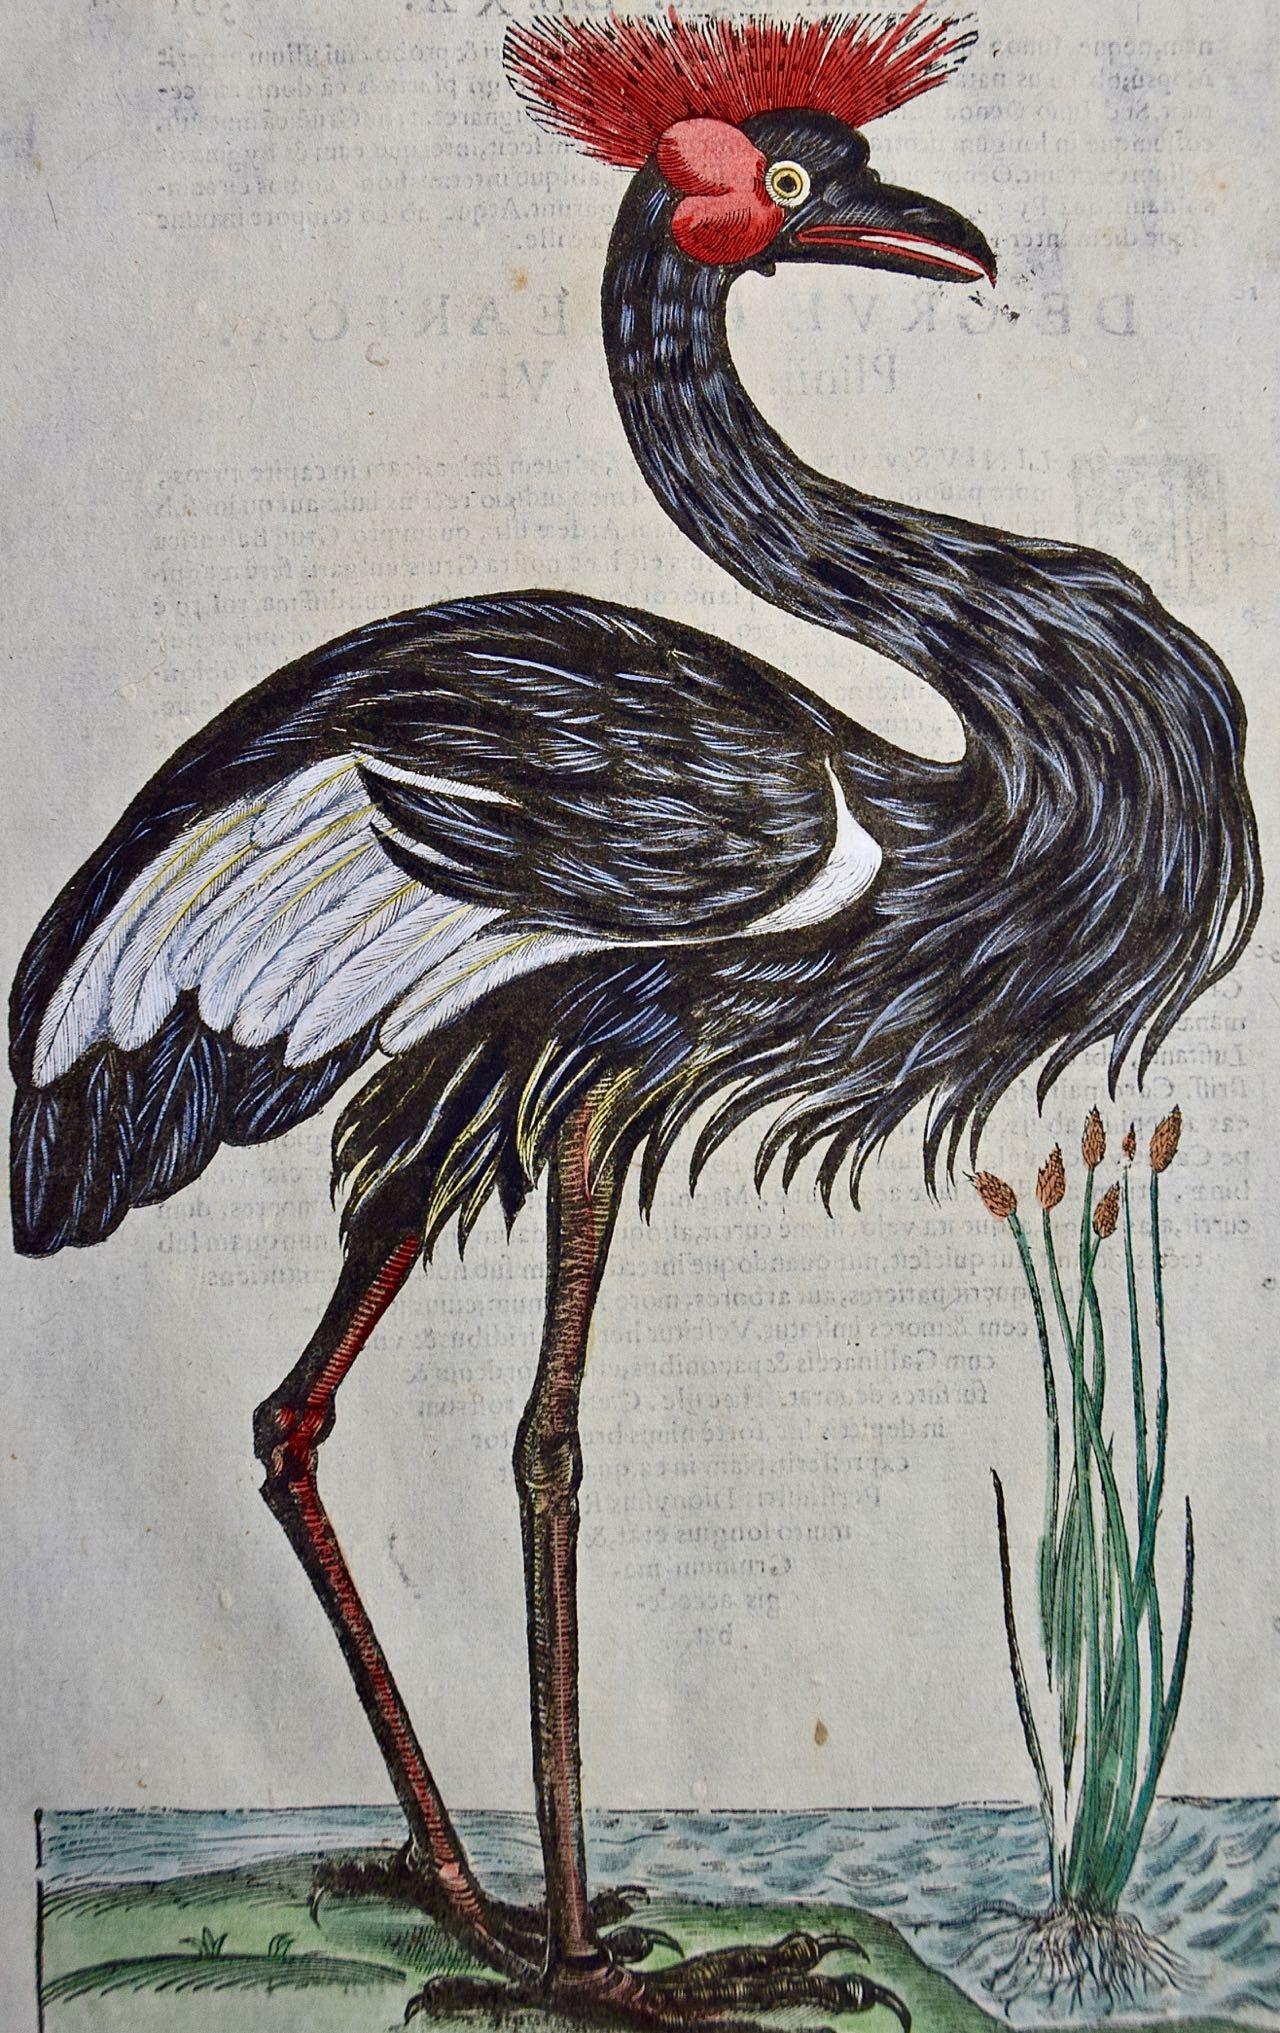 Crowned Heron Bird: A 16th/17th Century Hand-colored Engraving by Aldrovandi - Print by Ulisse Aldrovandi